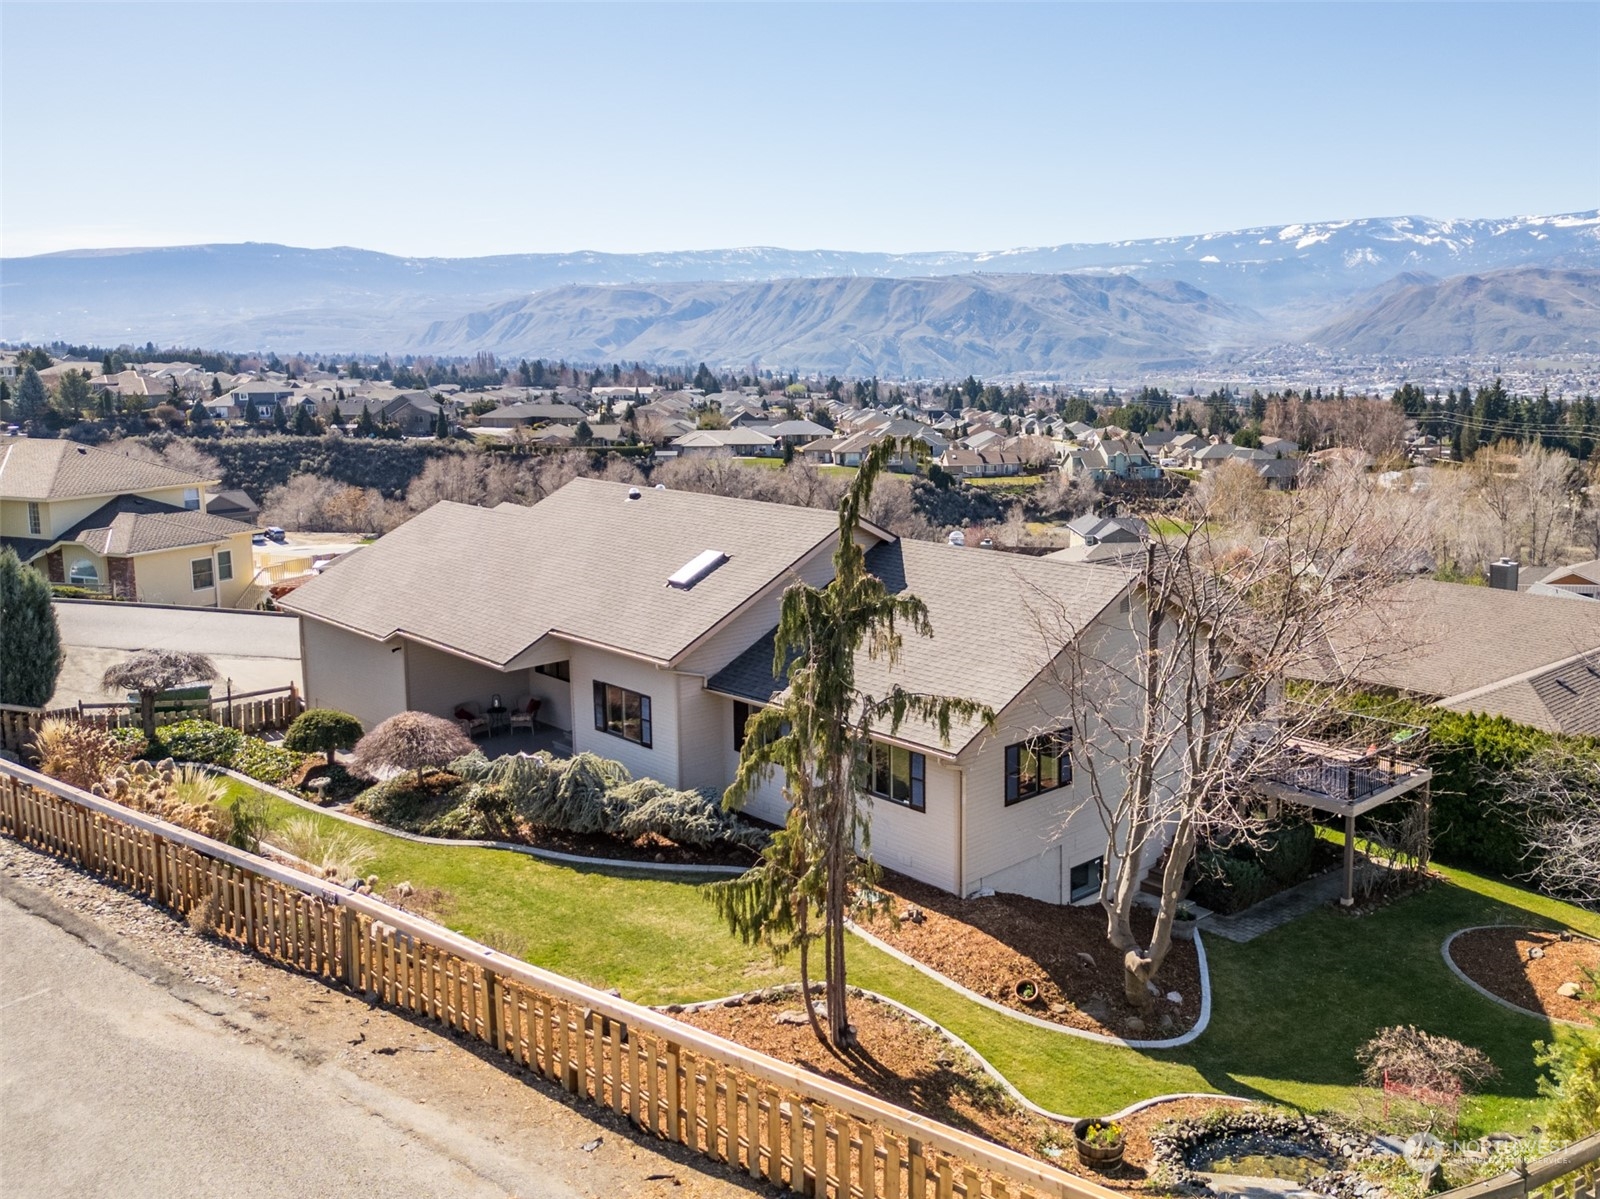 an aerial view of residential houses with outdoor space and mountain view